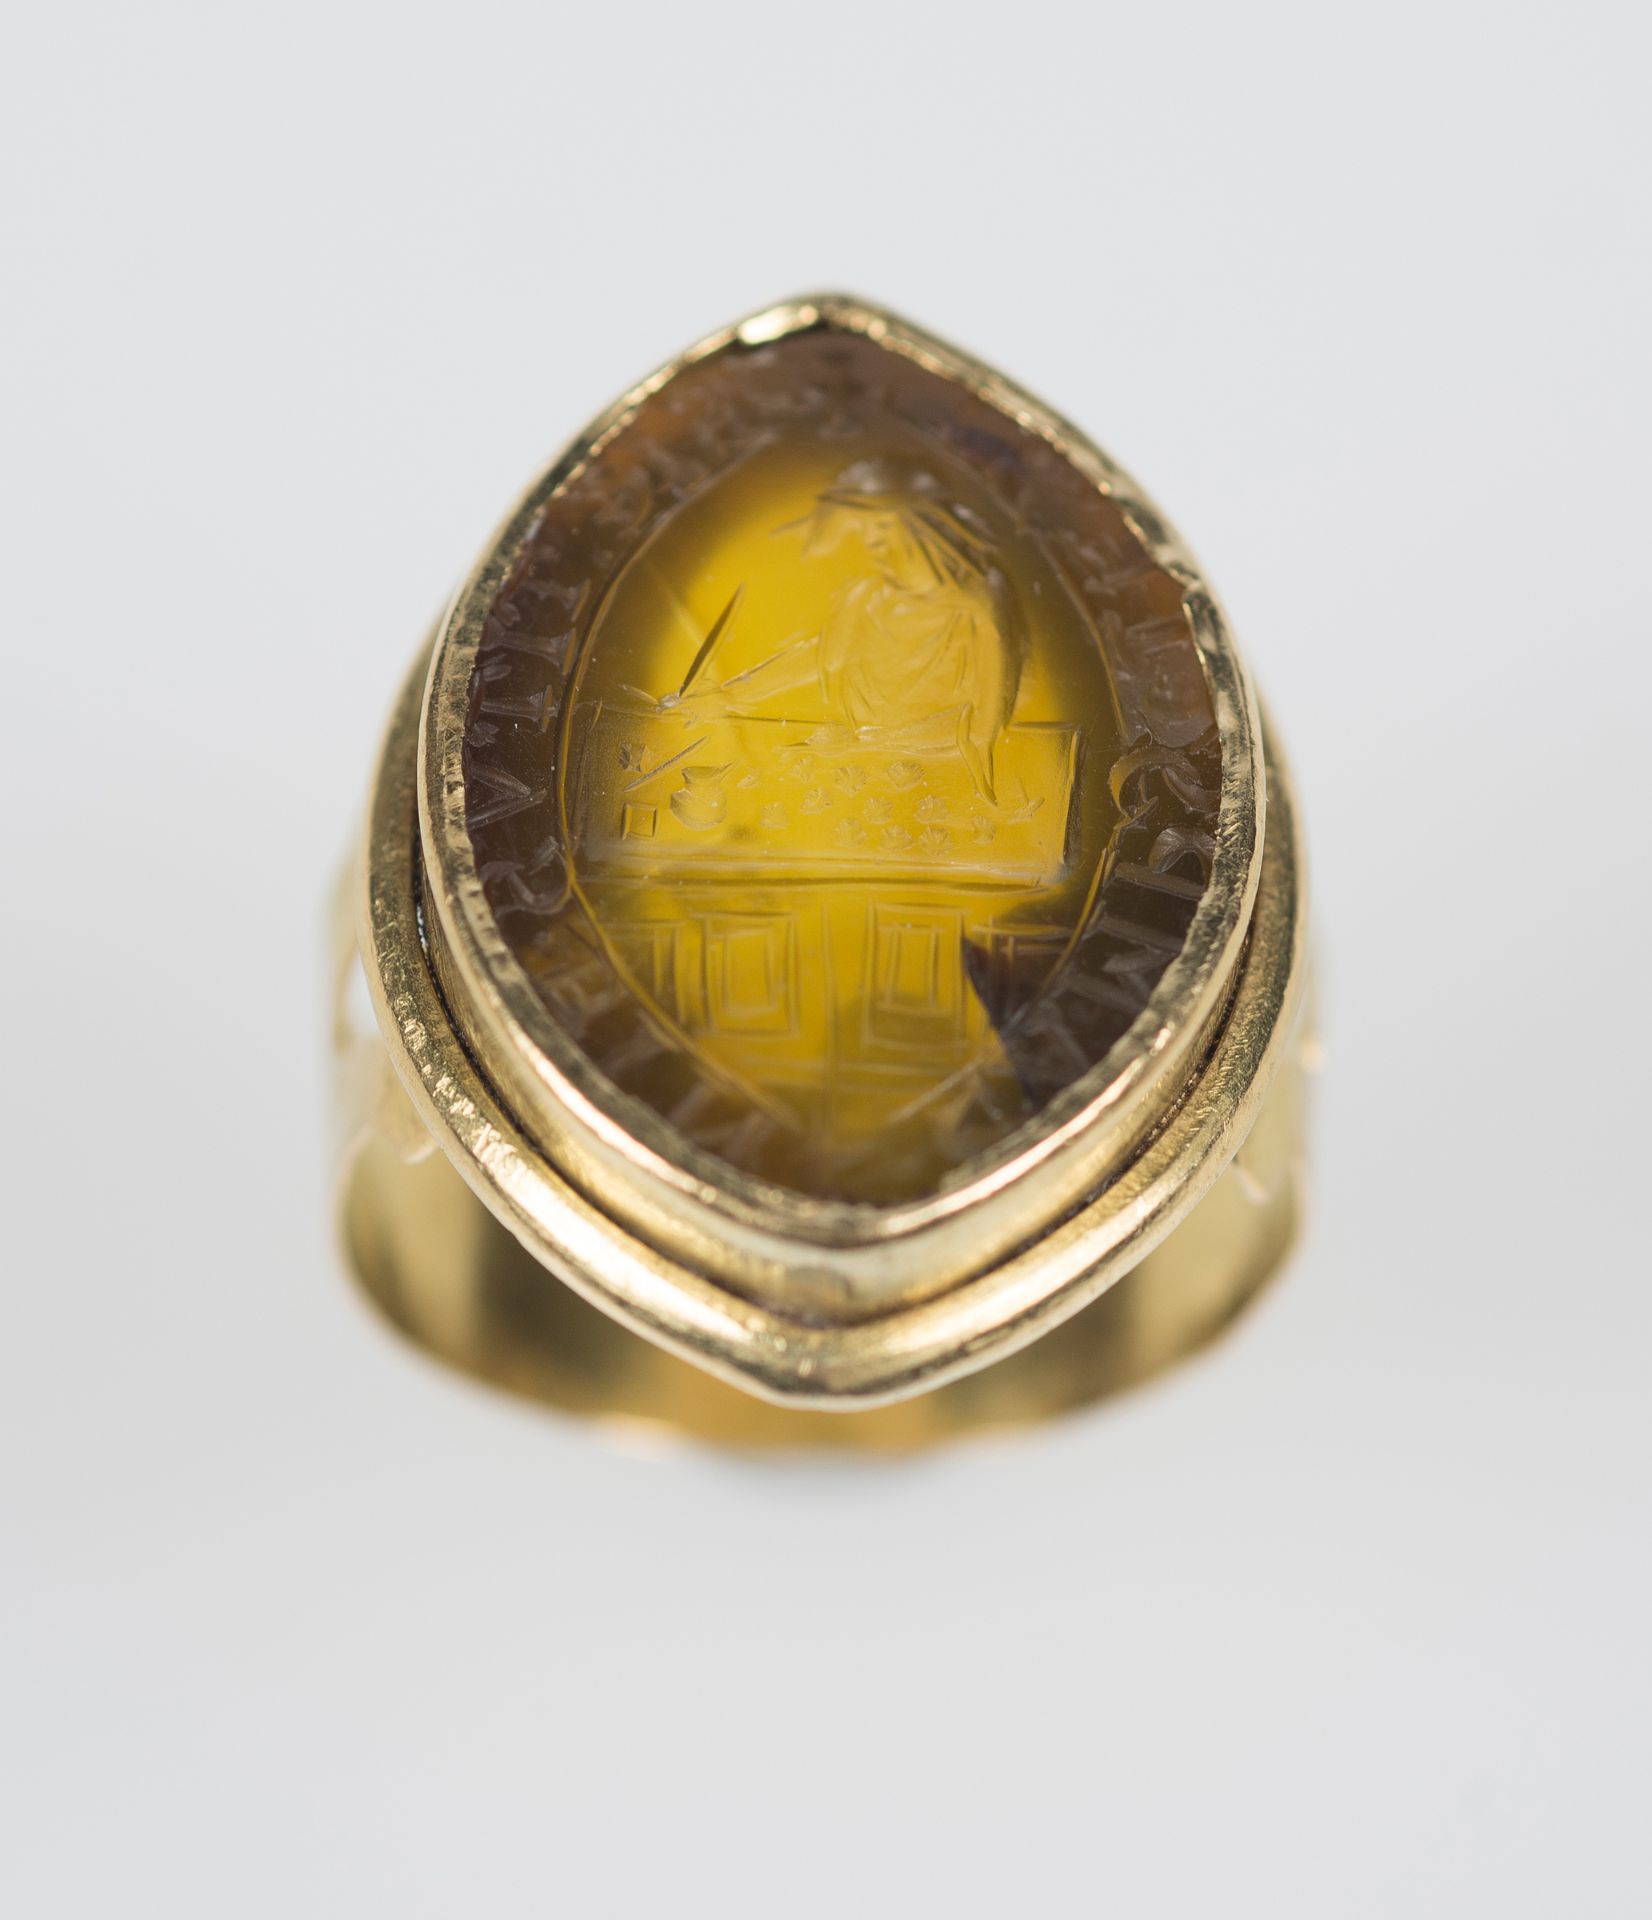 Rare, gold and agate money changer’s seal. Medieval period. Italy. Gothic. 14th century. - Bild 3 aus 5